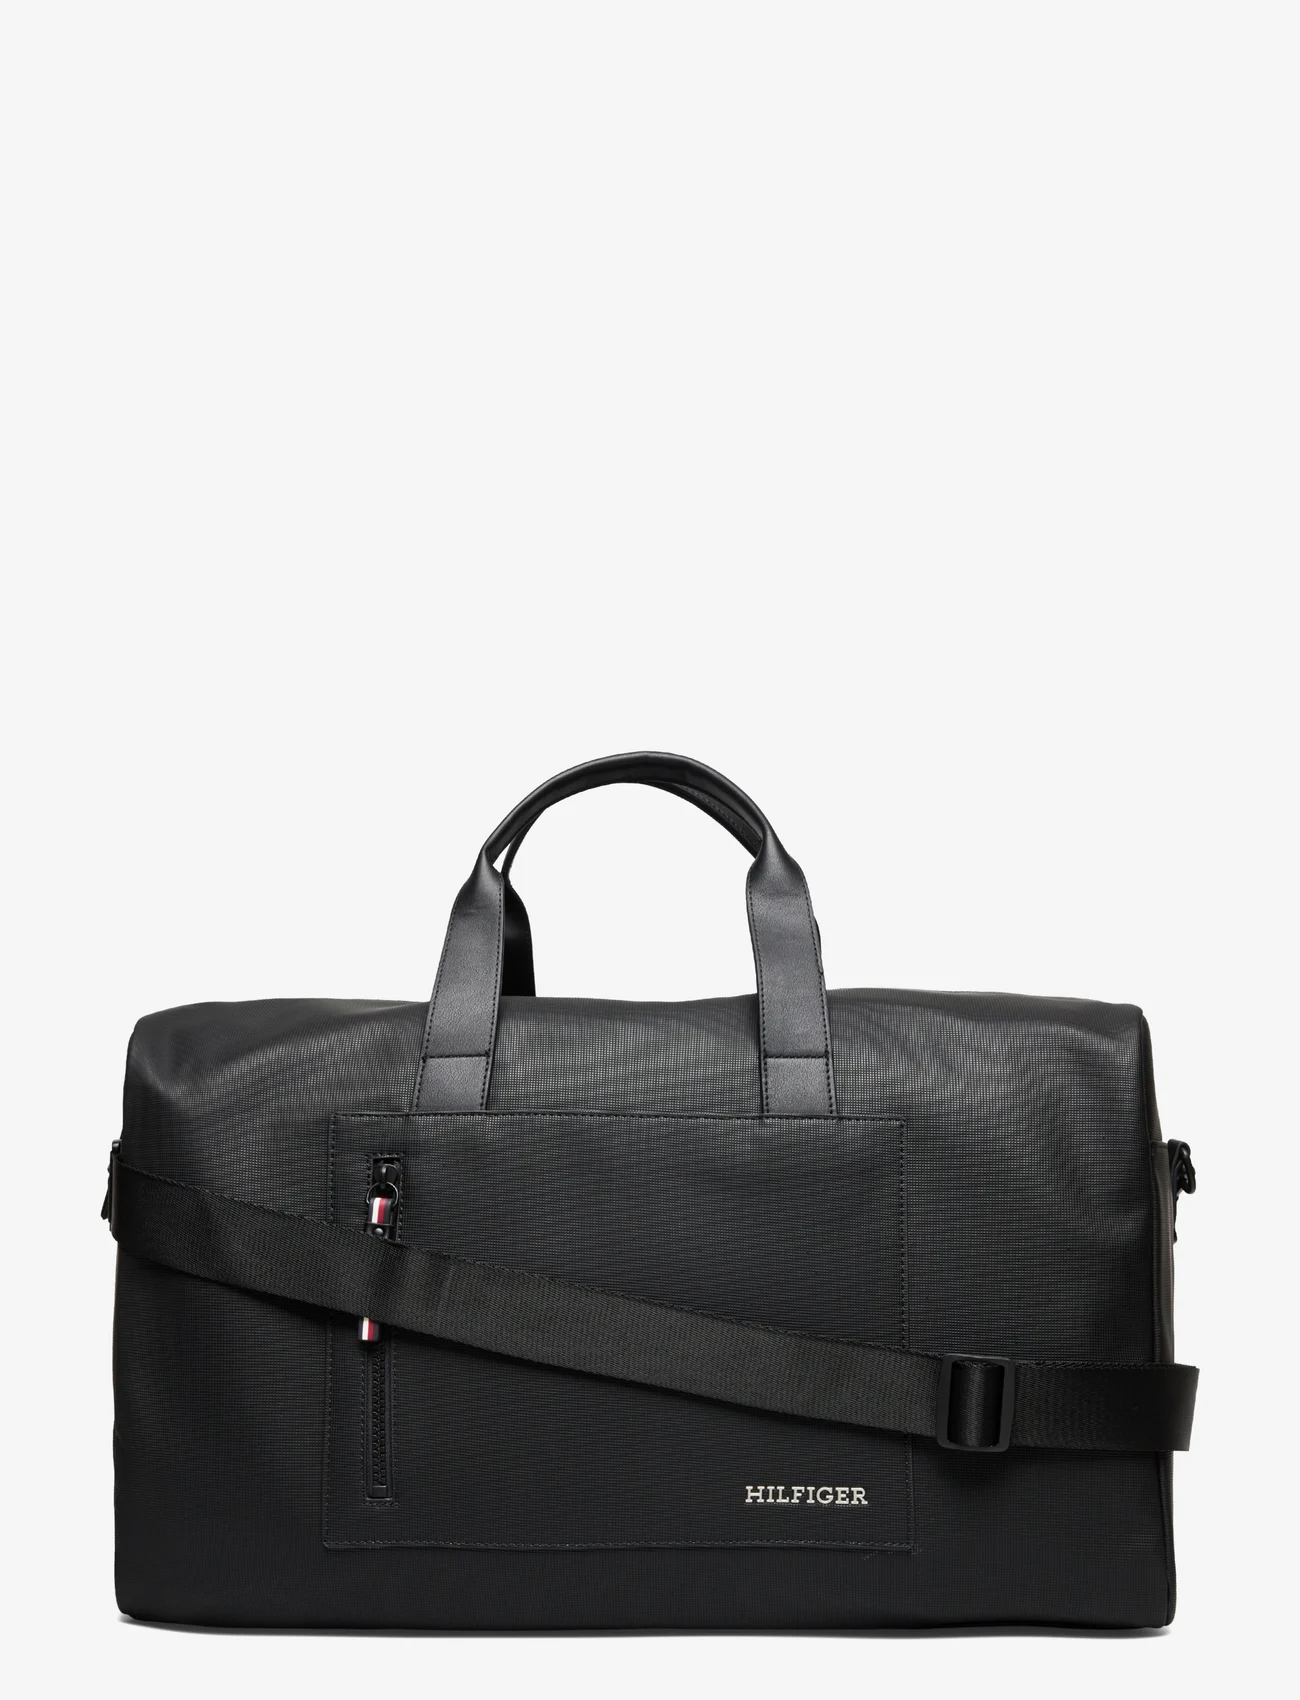 Tommy Hilfiger - TH PIQUE DUFFLE - weekend bags - black - 0